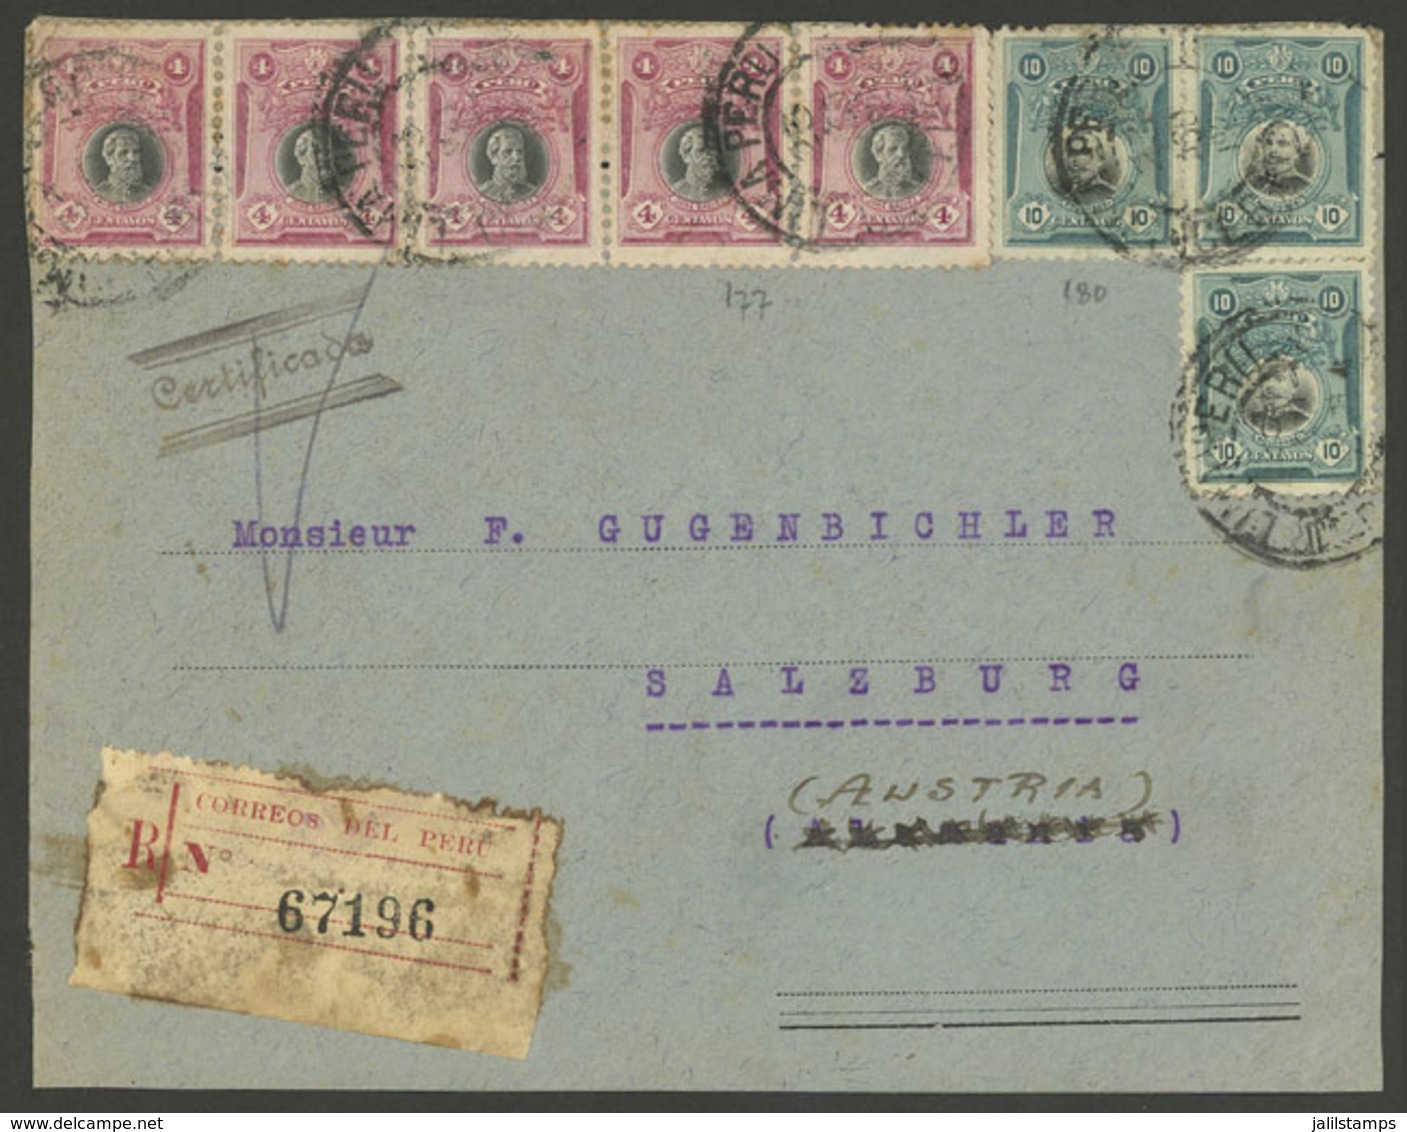 PERU: Circa 1920, Cover Front Sent From Paita To Austria With Attractive Large Postage Of 50c., VF! - Peru